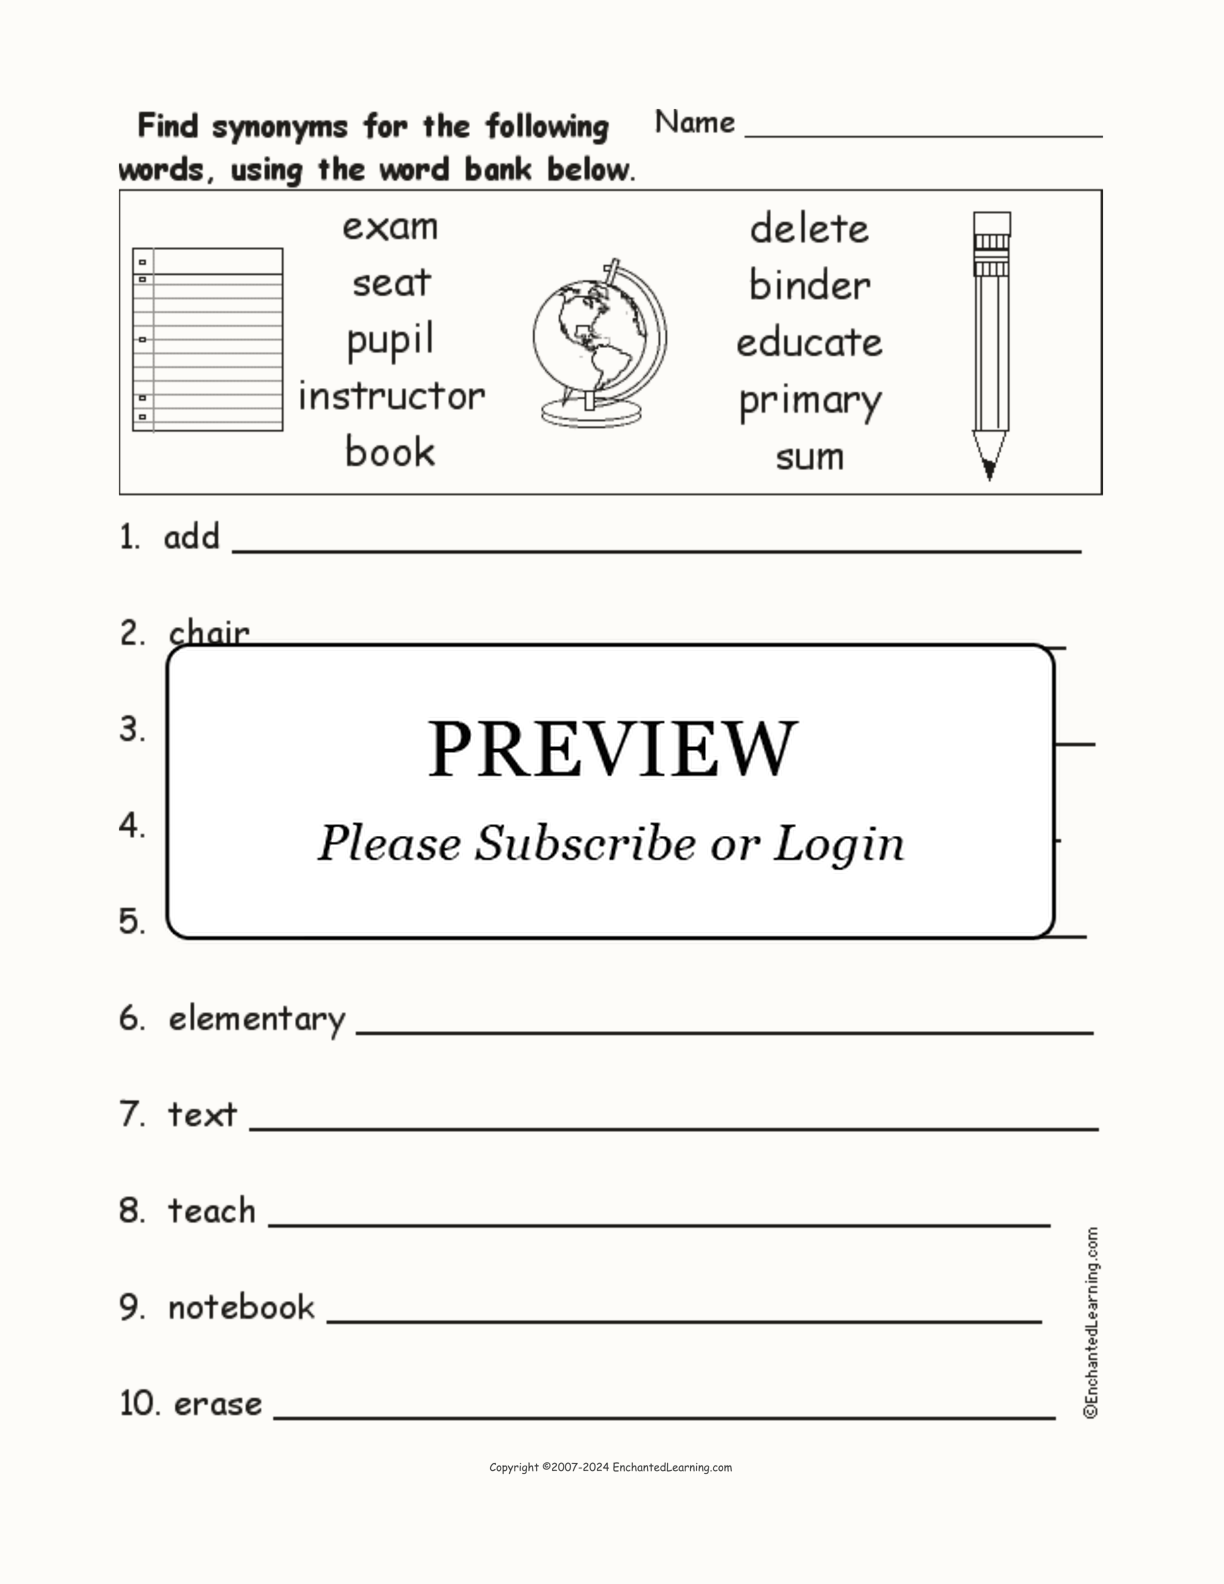 School Synonyms interactive worksheet page 1